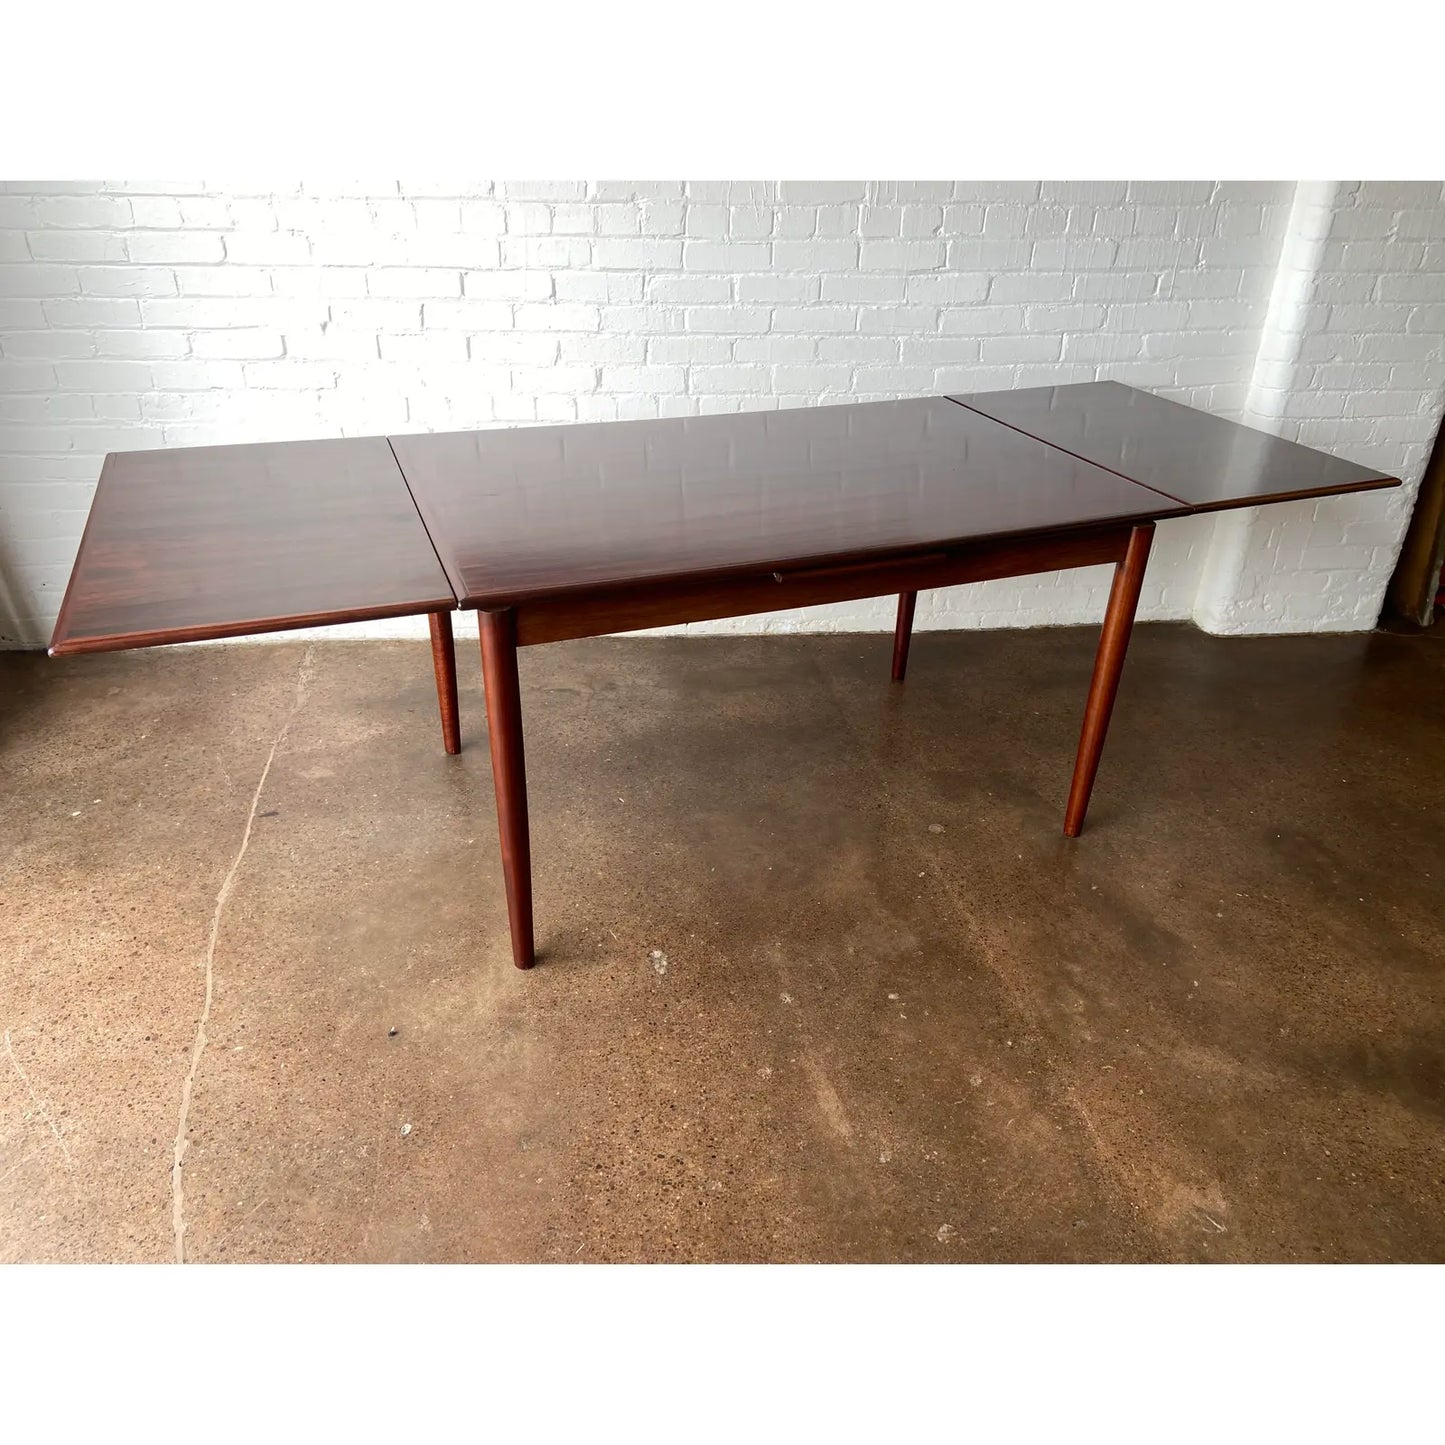 EXPANDABLE DANISH ROSEWOOD DINING TABLE WITH DRAW LEAF